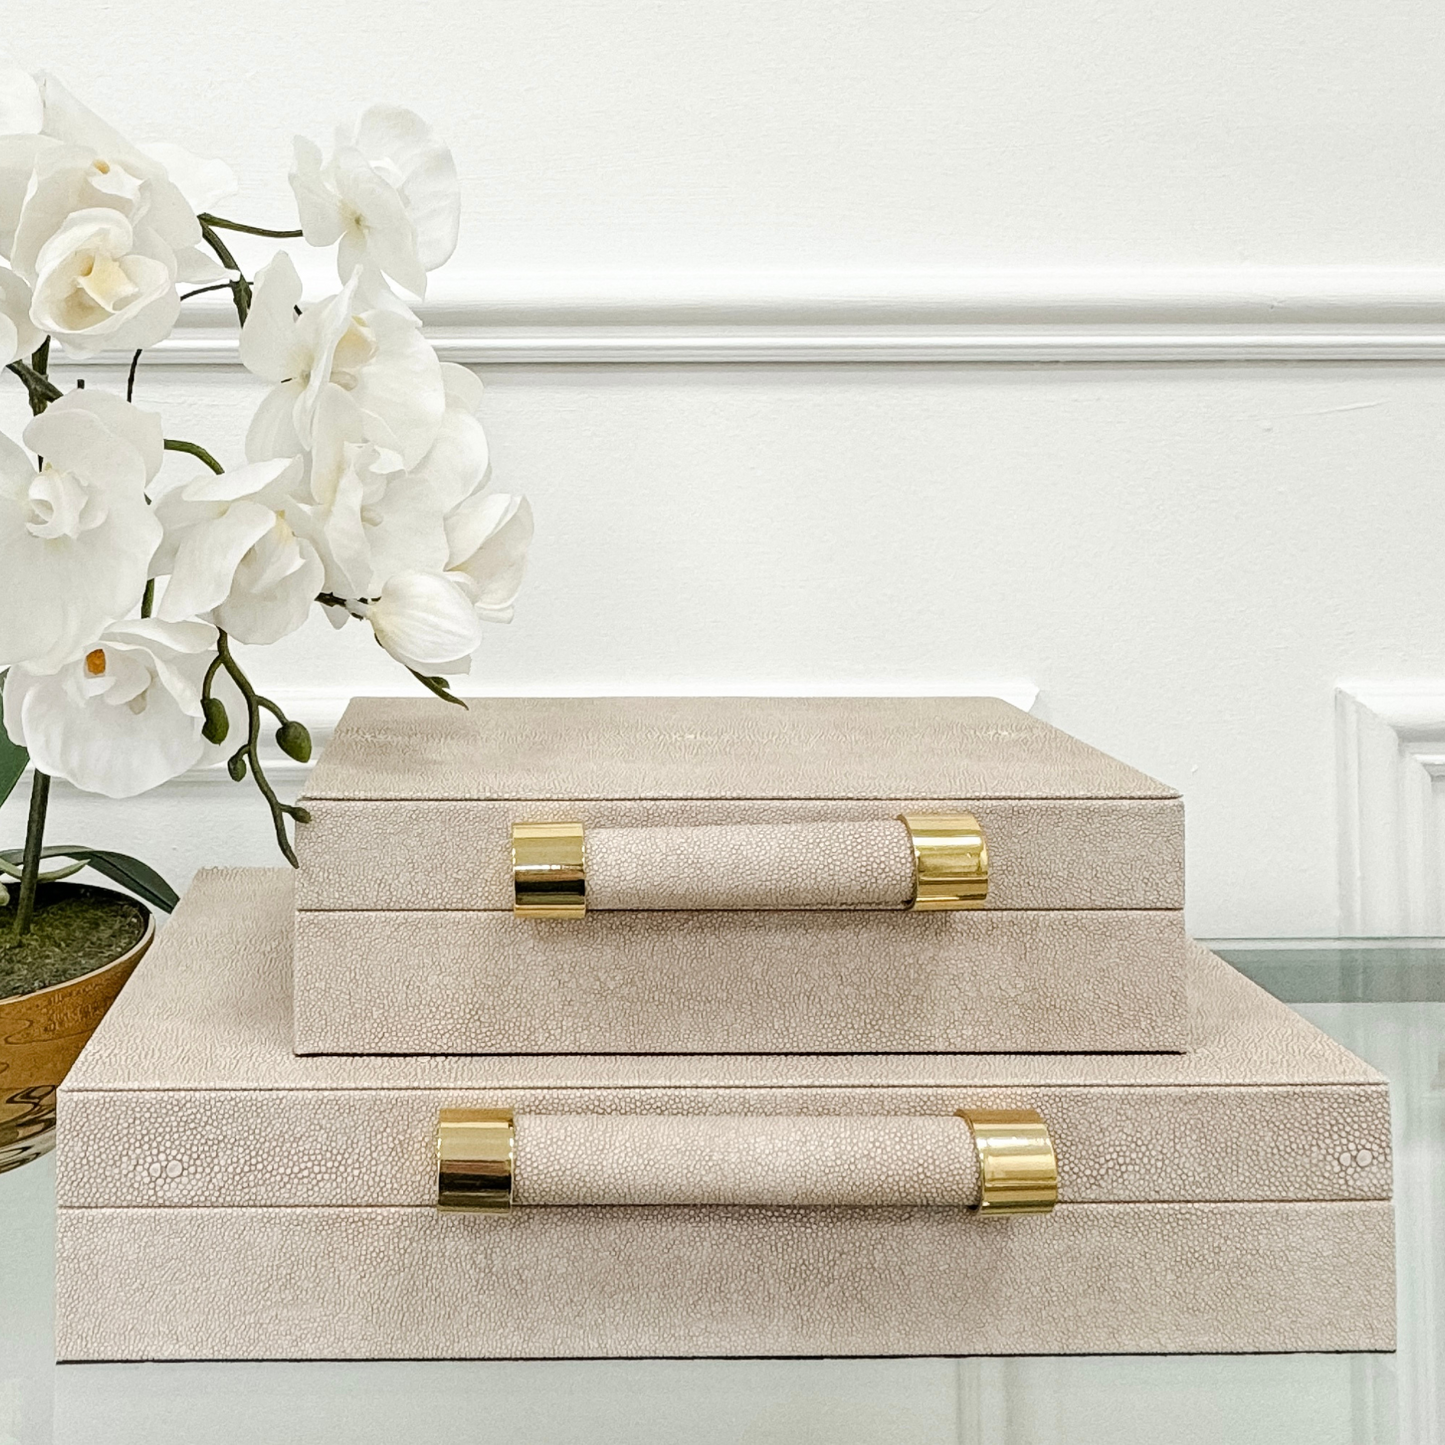 Mink Faux Leather Storage Cases with Gold Handle